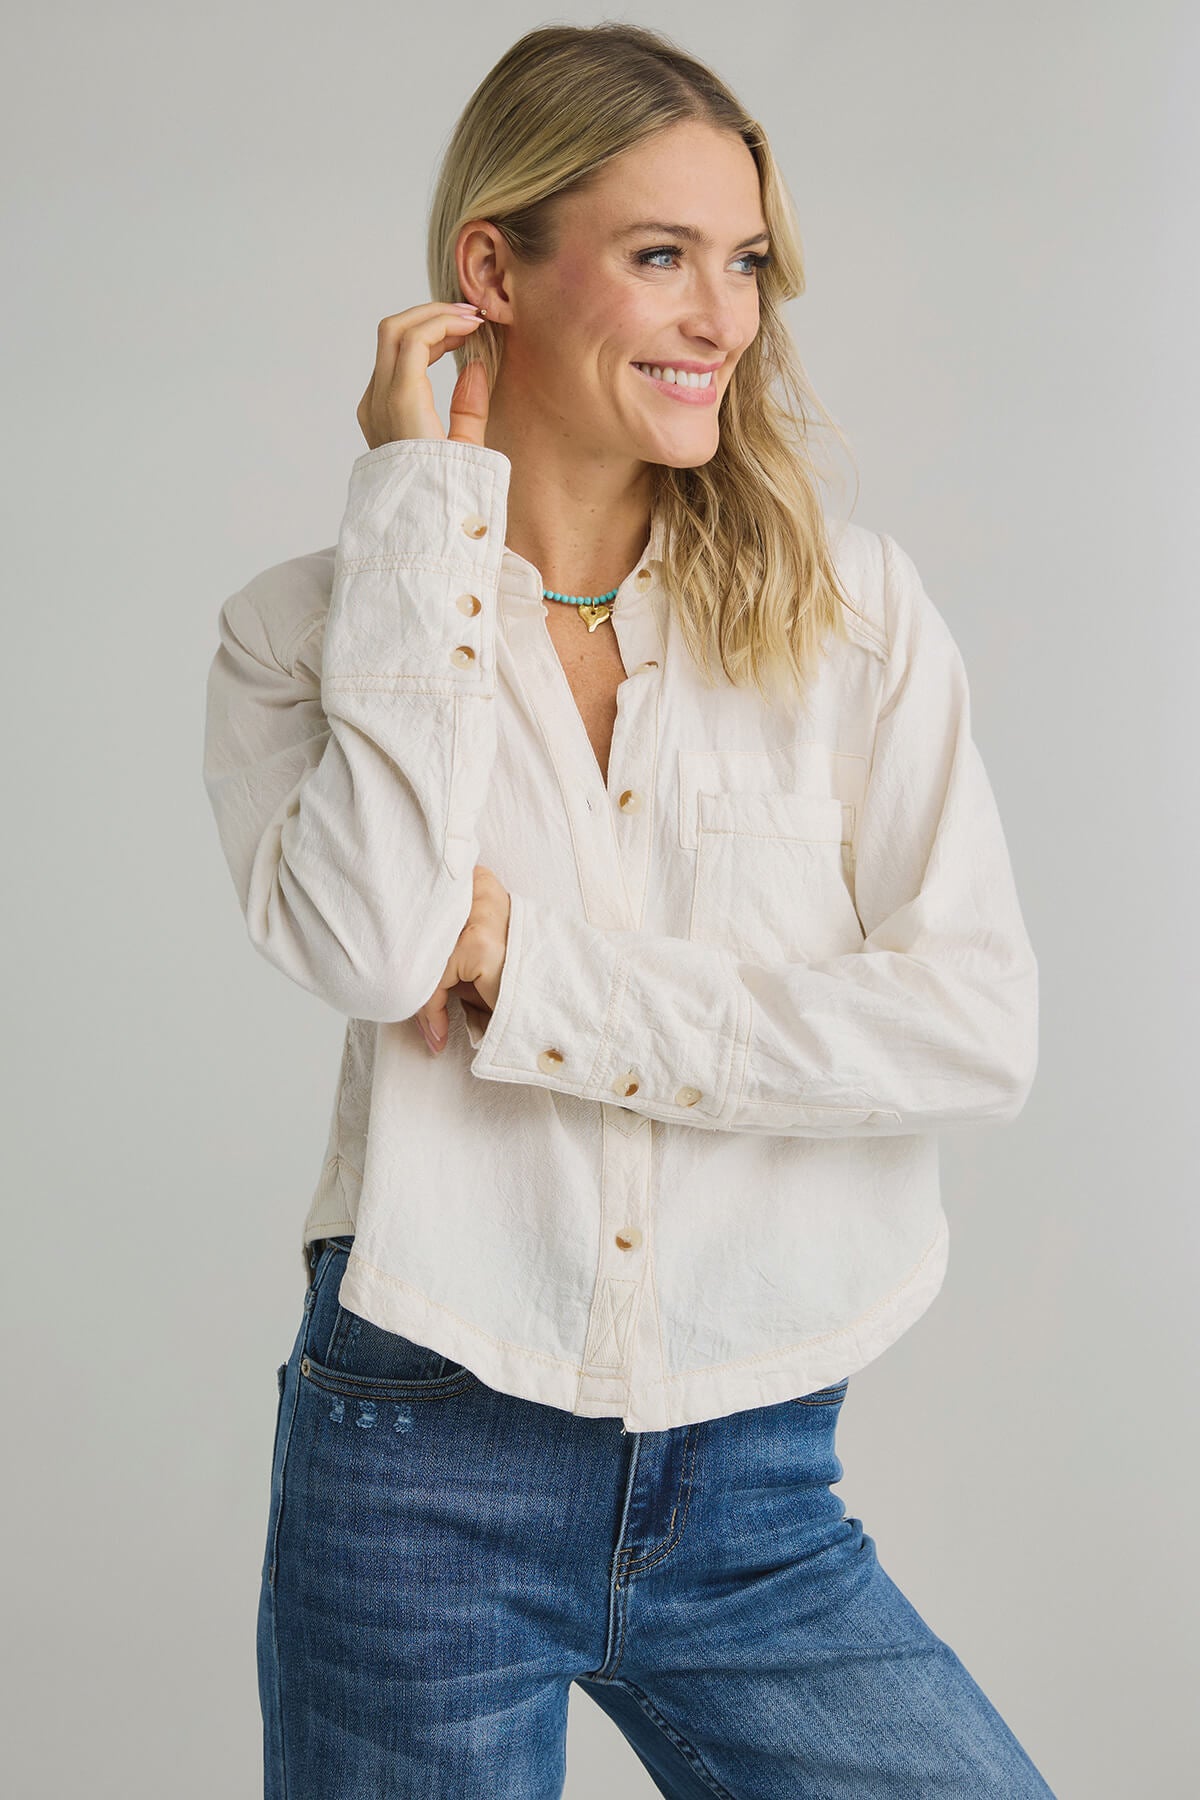 Free People Classic Oxford Top – Social Threads